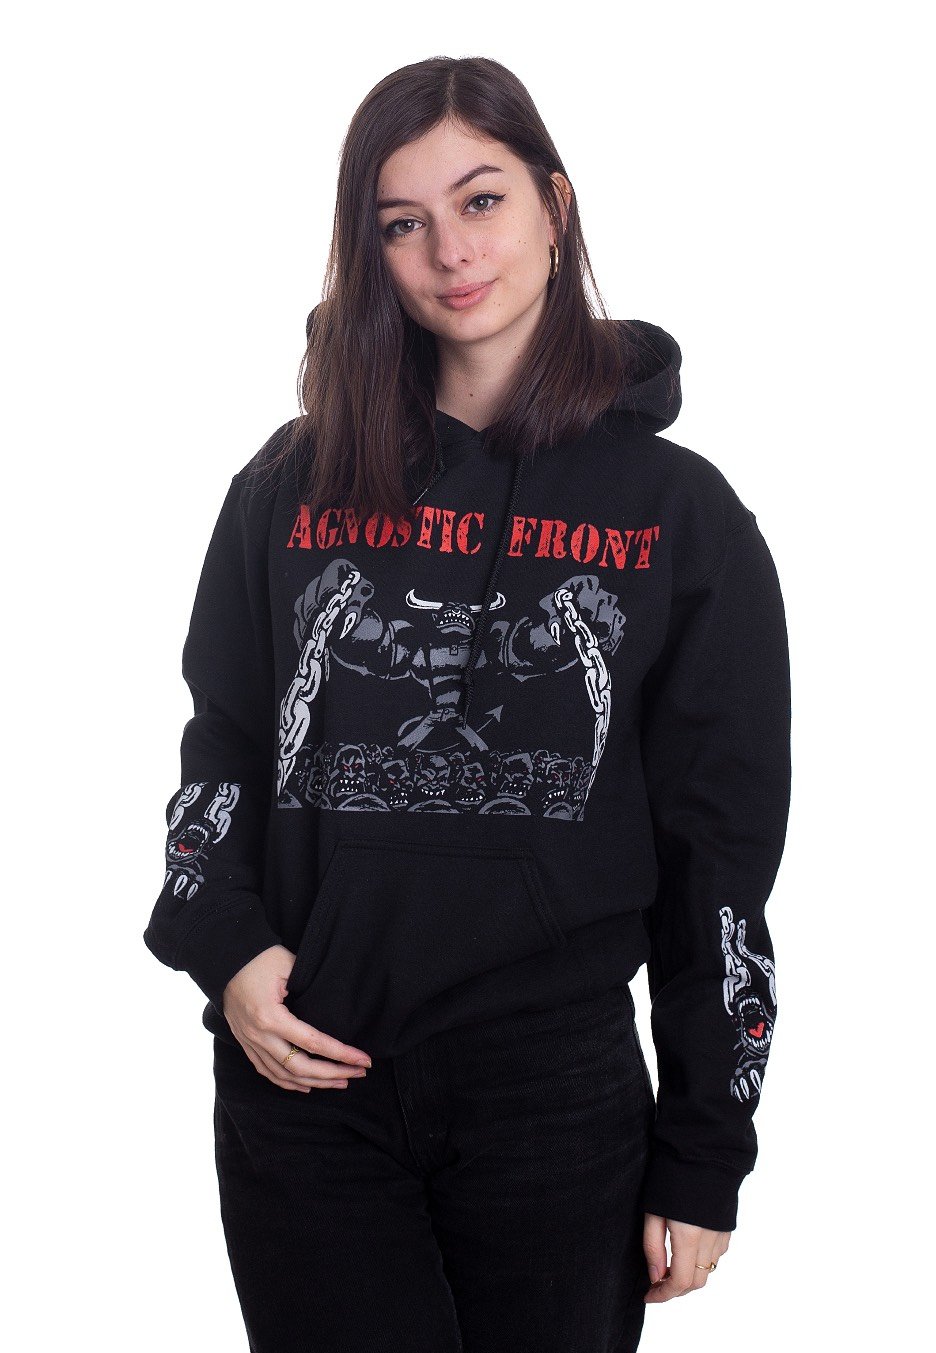 Agnostic Front - Dog Chains - Hoodies